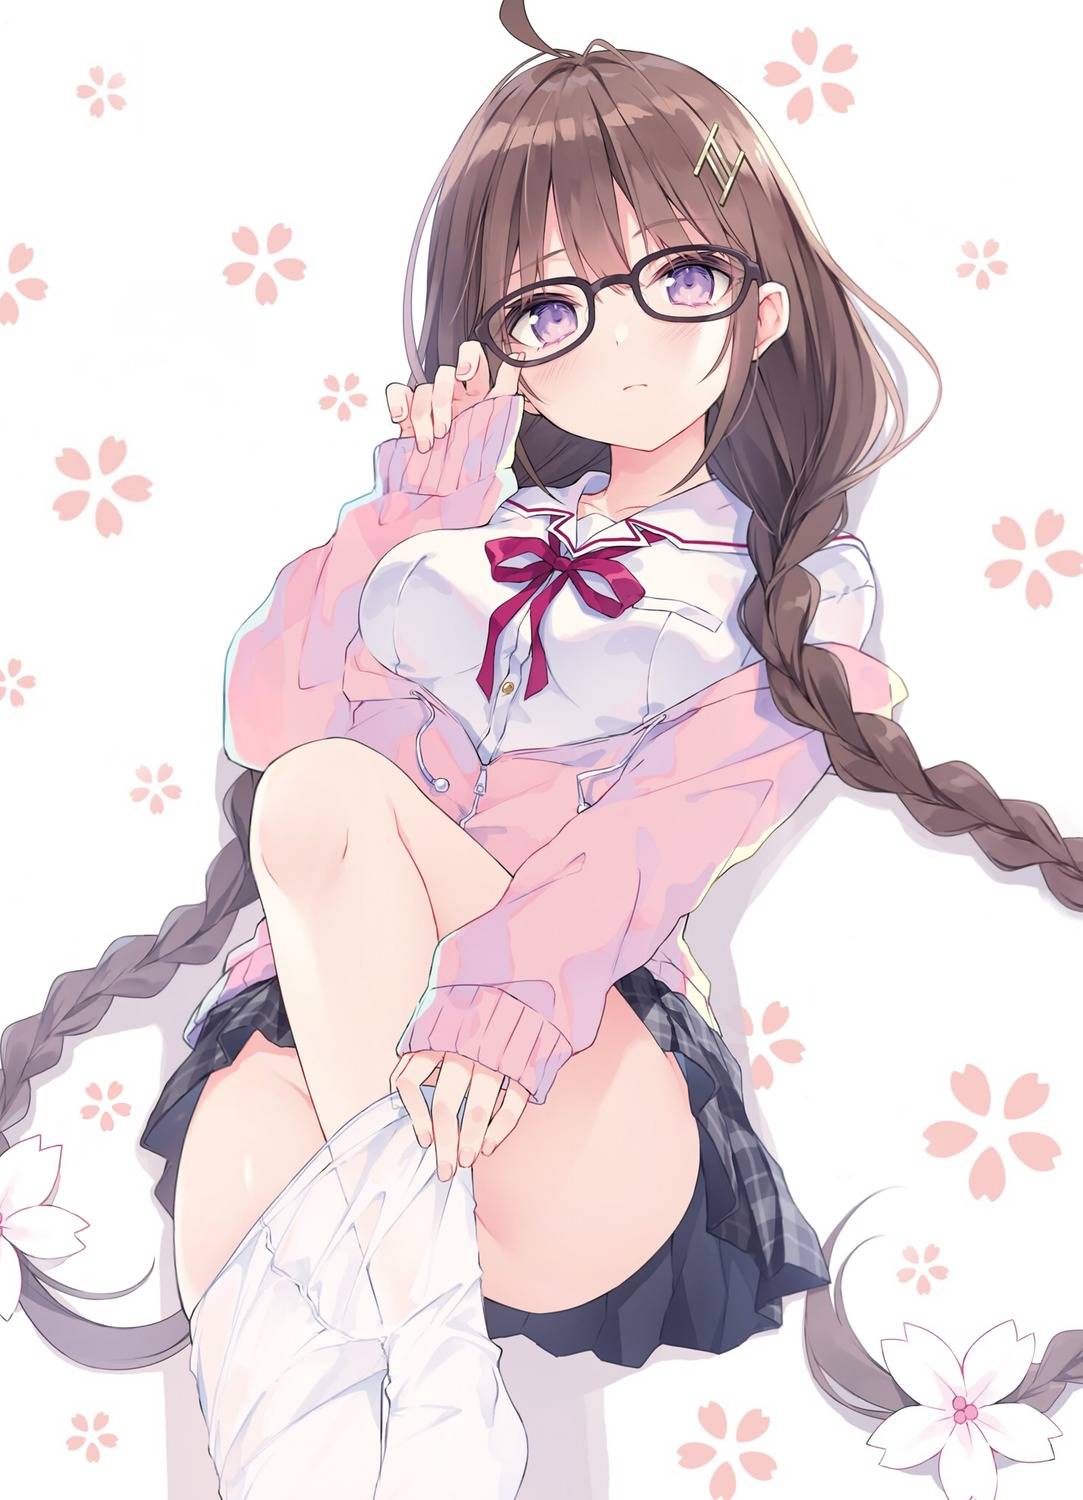 glasses-girls Hentai images&pics gallery 49